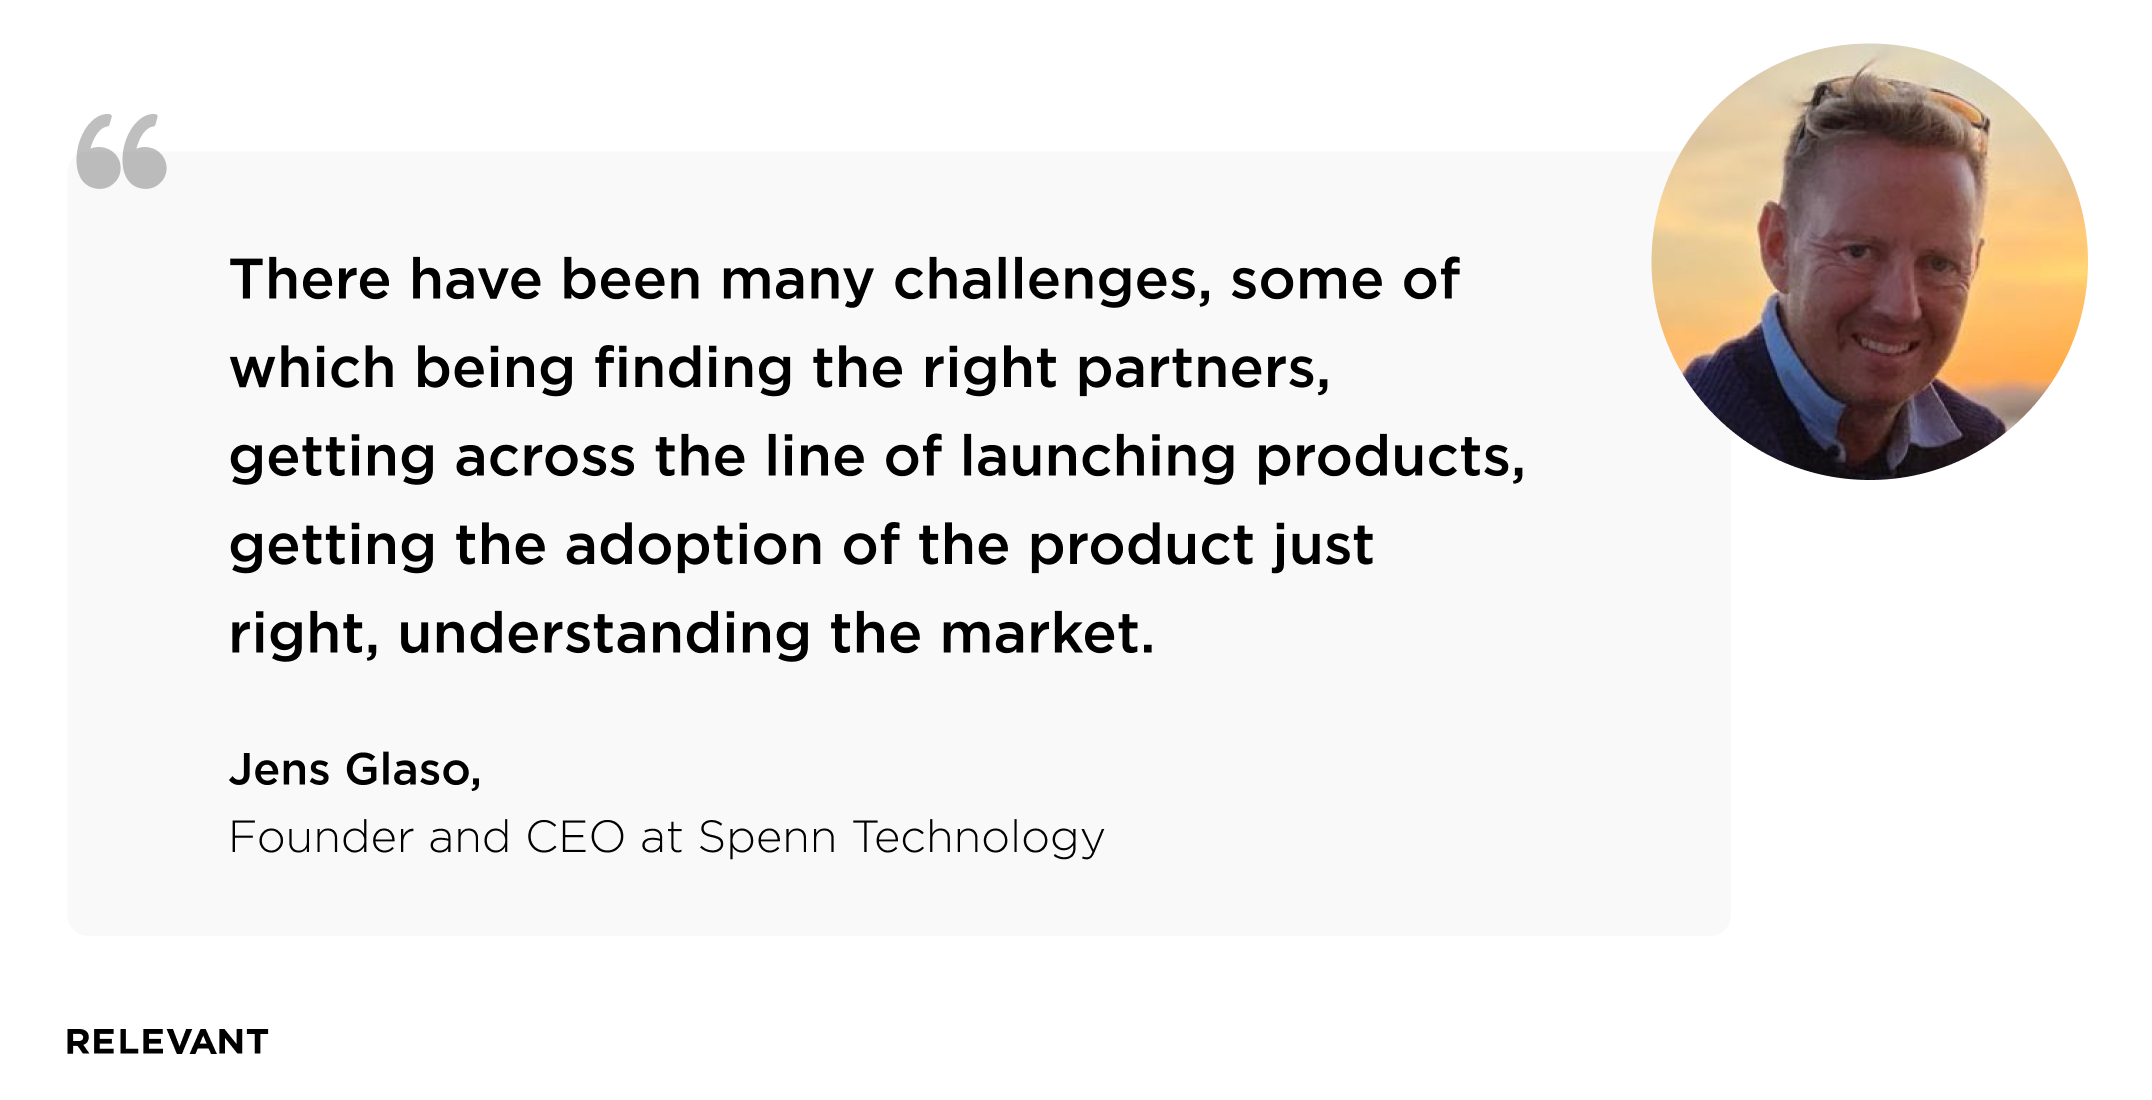 Jens Glaso,  Founder and CEO
at Spenn Technology 